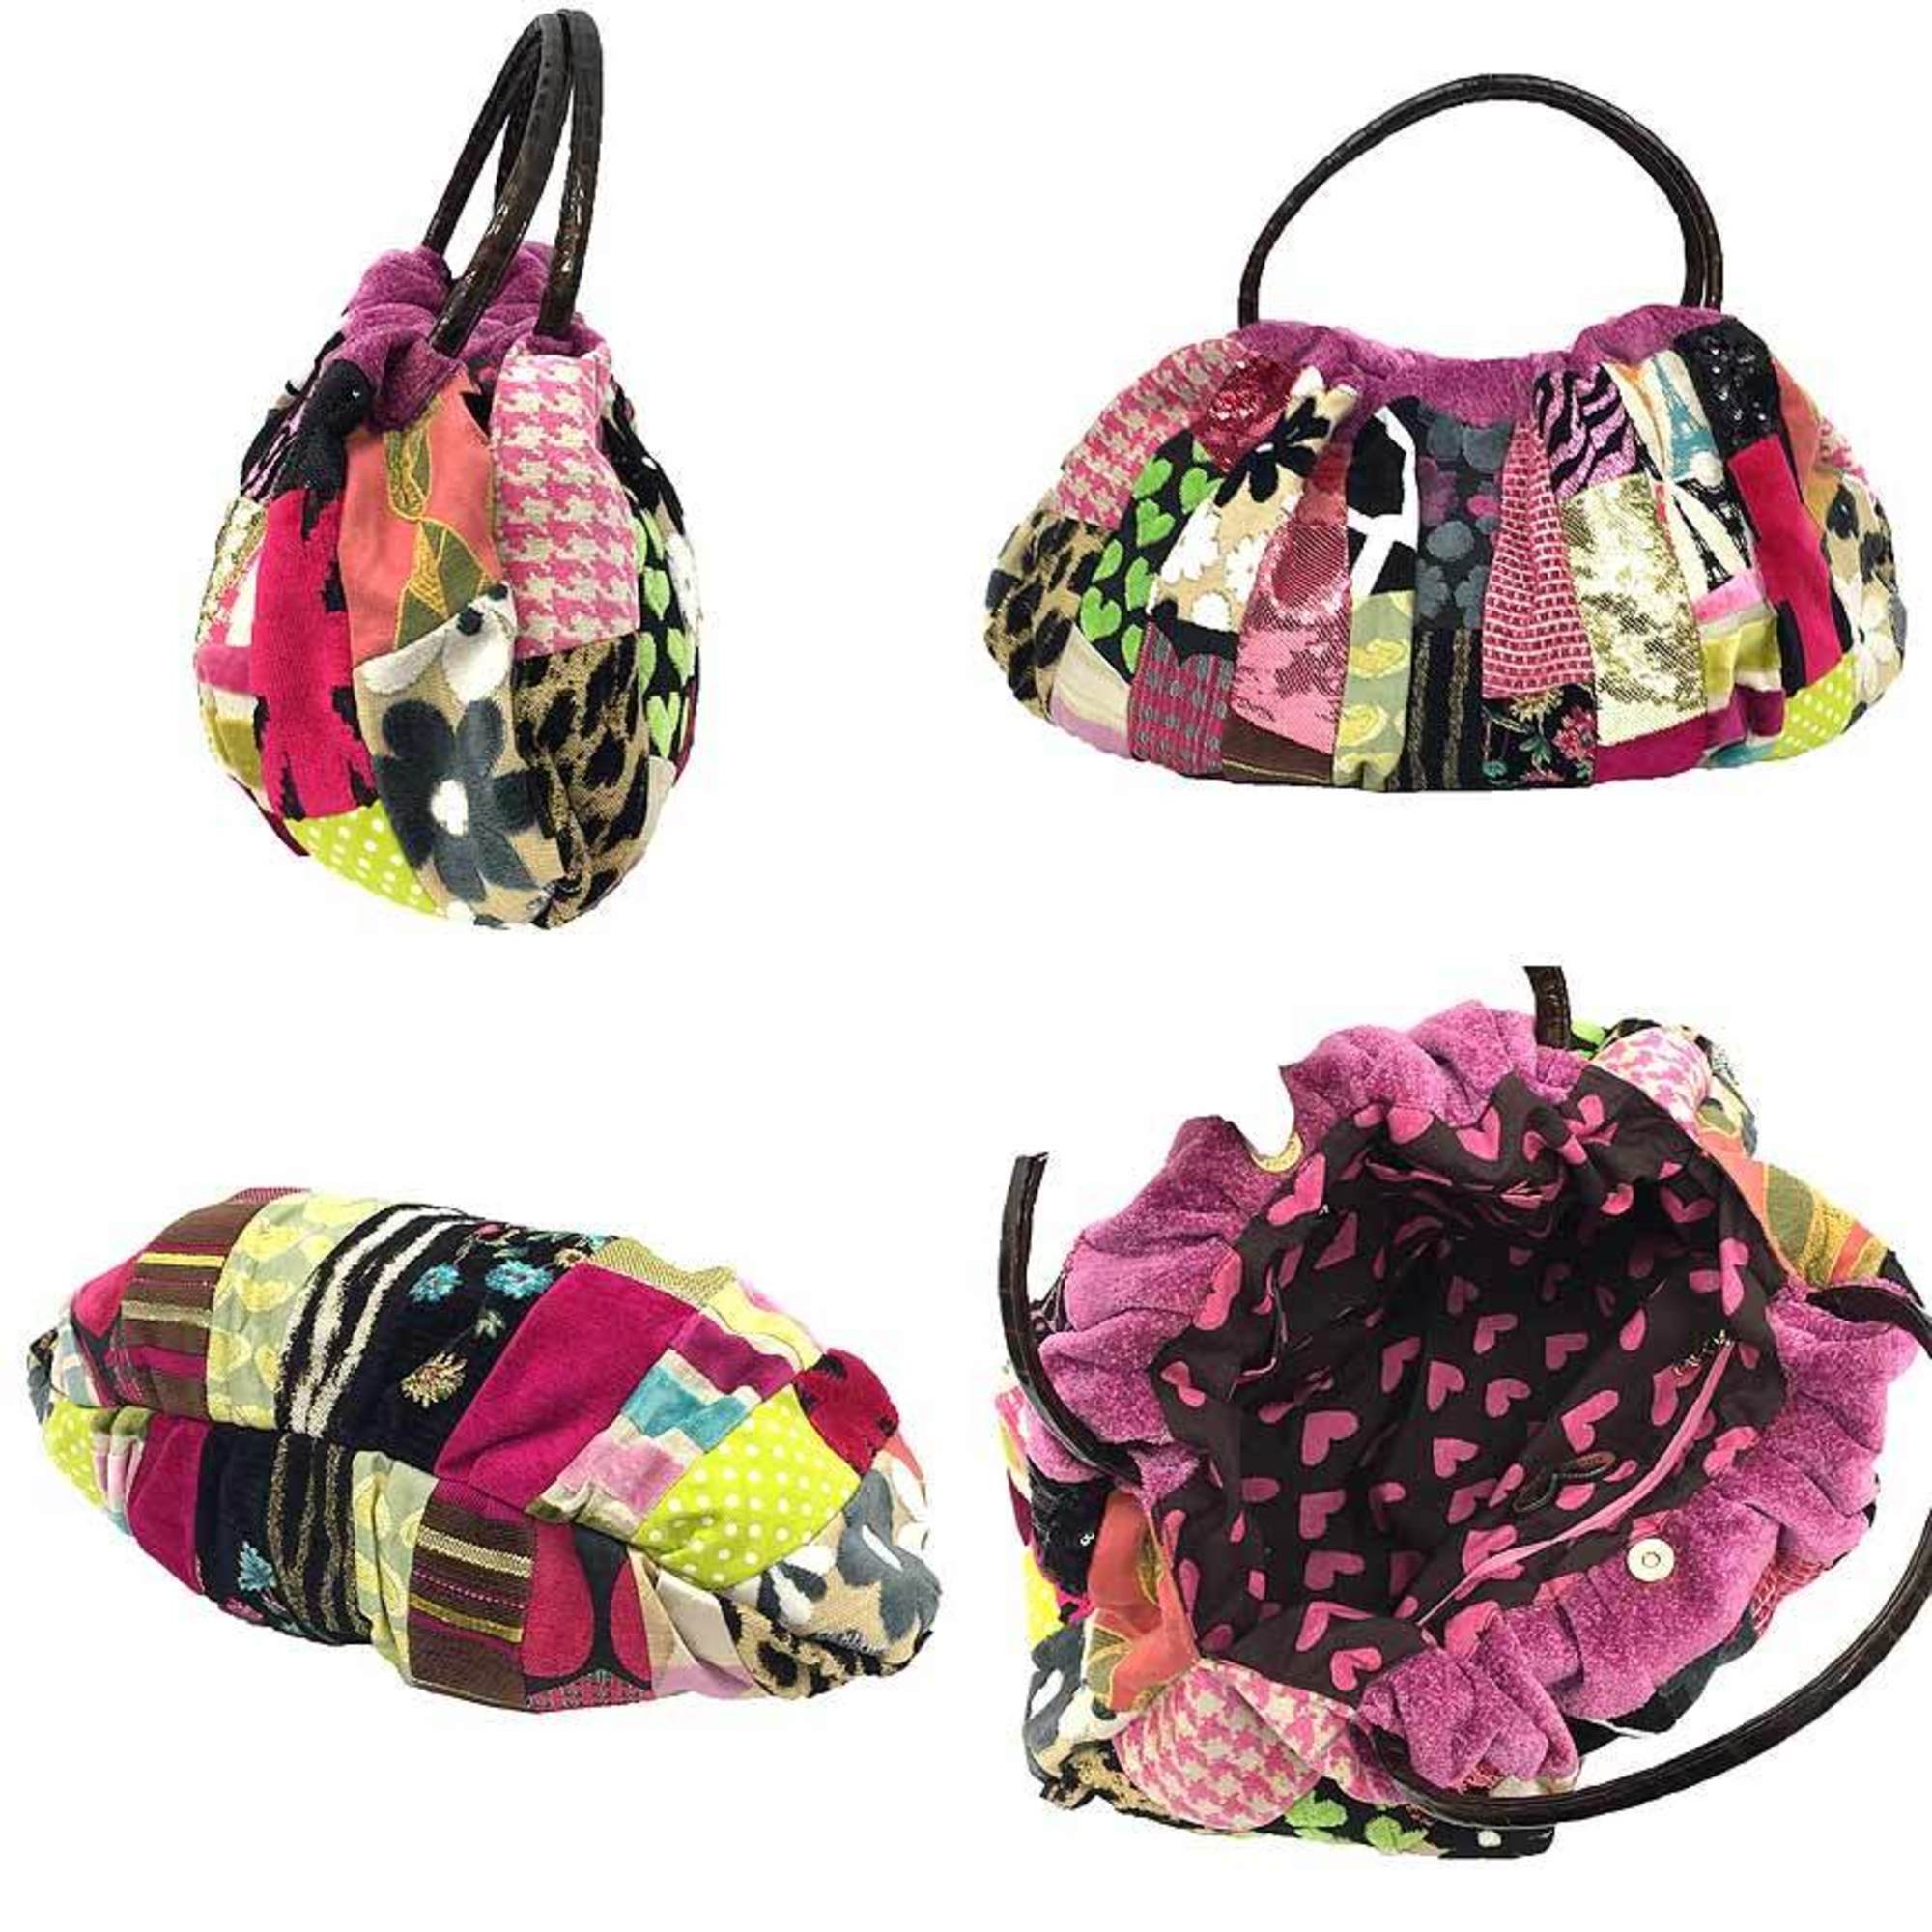 Think Bee Variety Fabrics Large Bag Tote Patchwork Style Multicolor Women's a9856 10008366